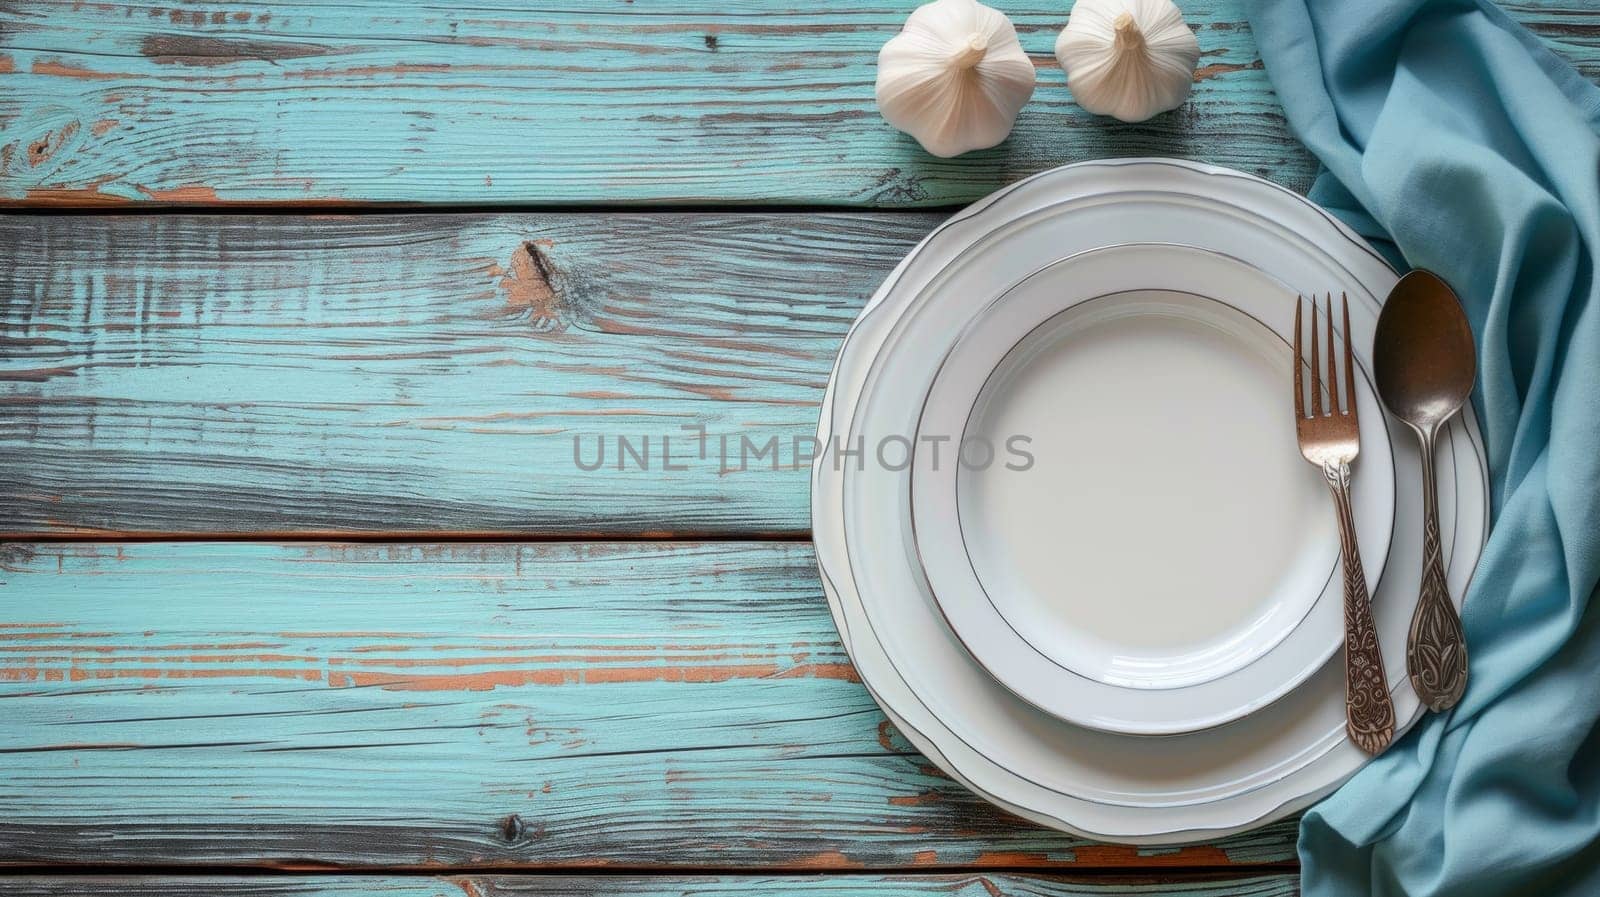 A plate, knife and fork on a blue tablecloth, AI by starush